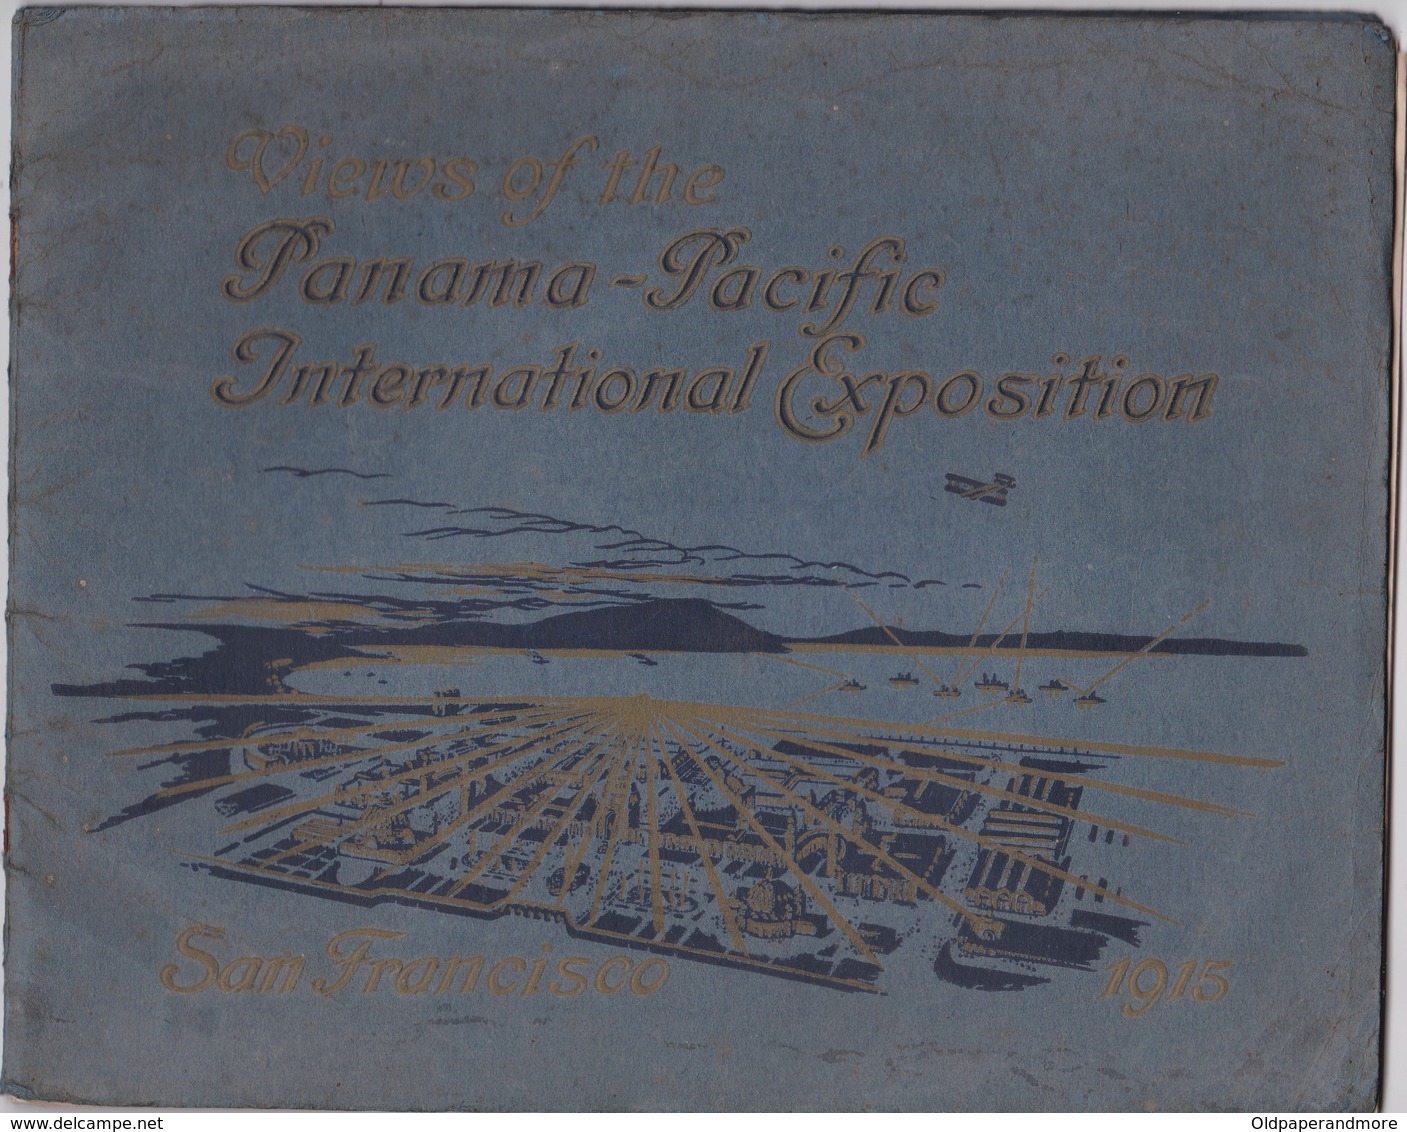 VEWS OF THE PANAMA - PACIFIC INTERNATIONAL EXPOSITION - SAN FRANCISCO 1915 - 12 PAGES W/ PICTURES - Documents Historiques